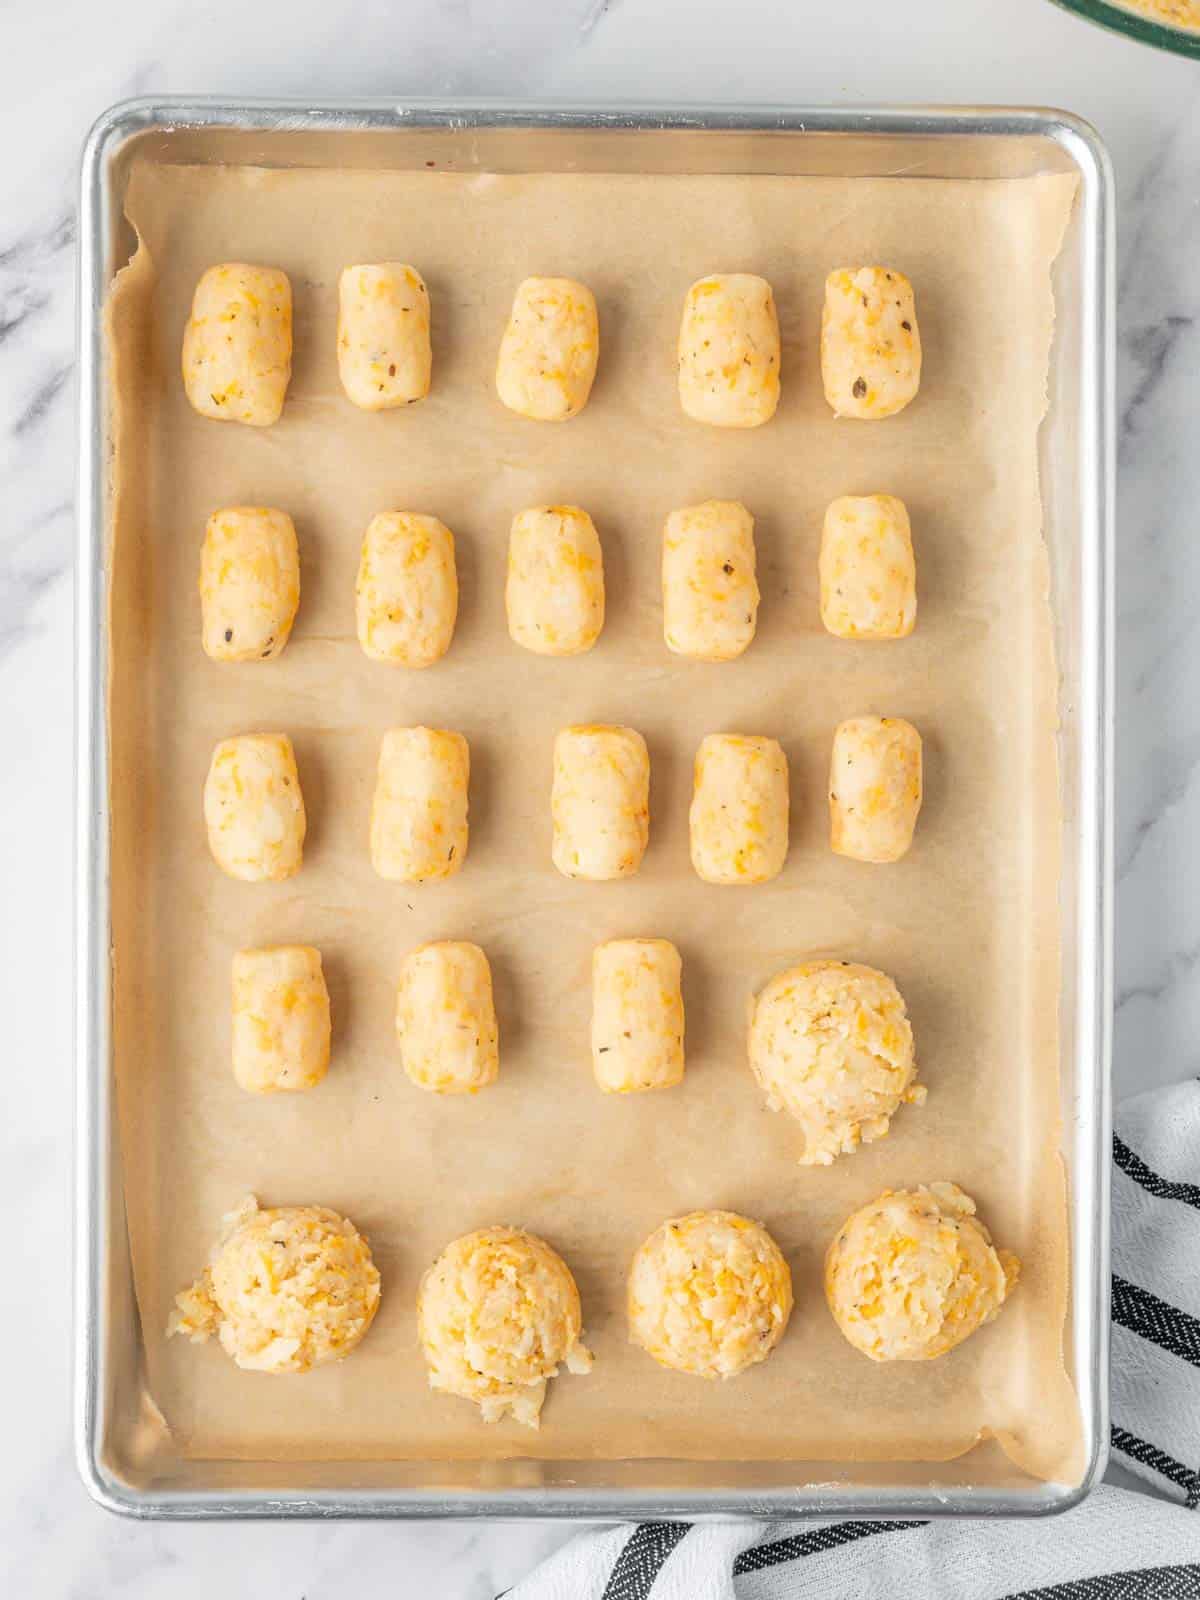 Scoops of potato and cheese mixture are formed into tater tots.